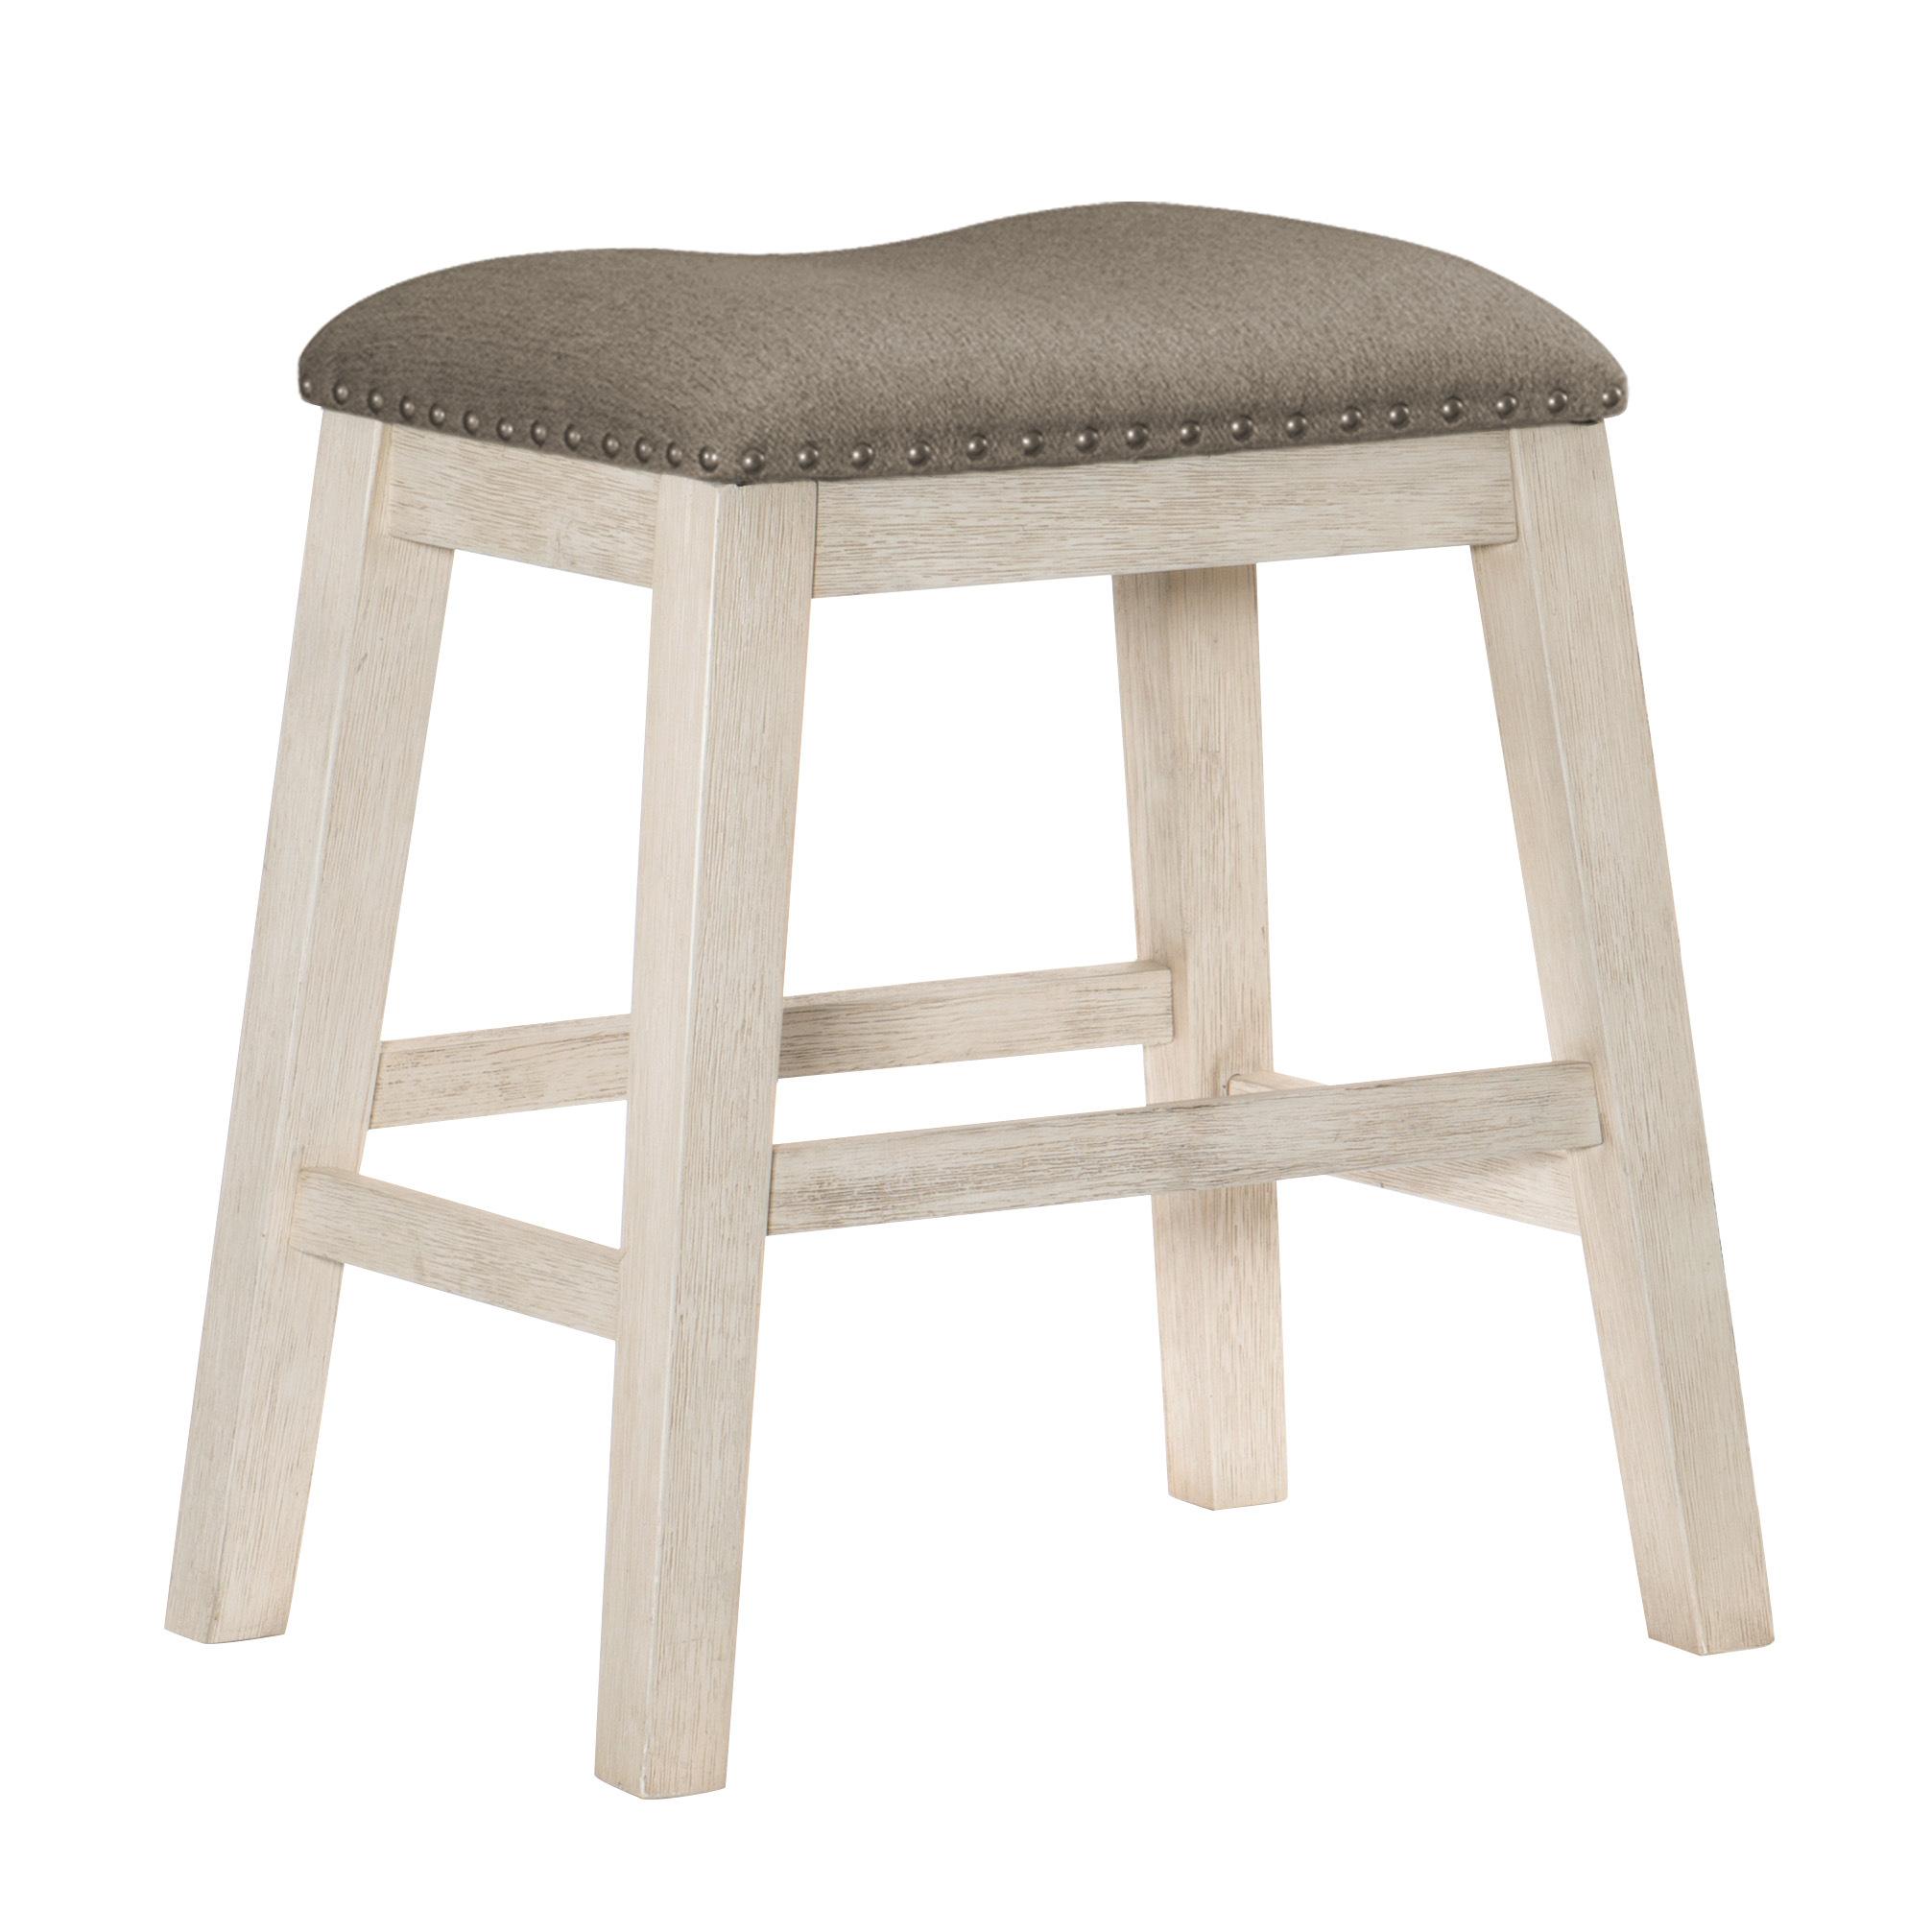 Transitional Counter Height Chair 5603WW-24 Timbre 5603WW-24 in Antique White Polyester